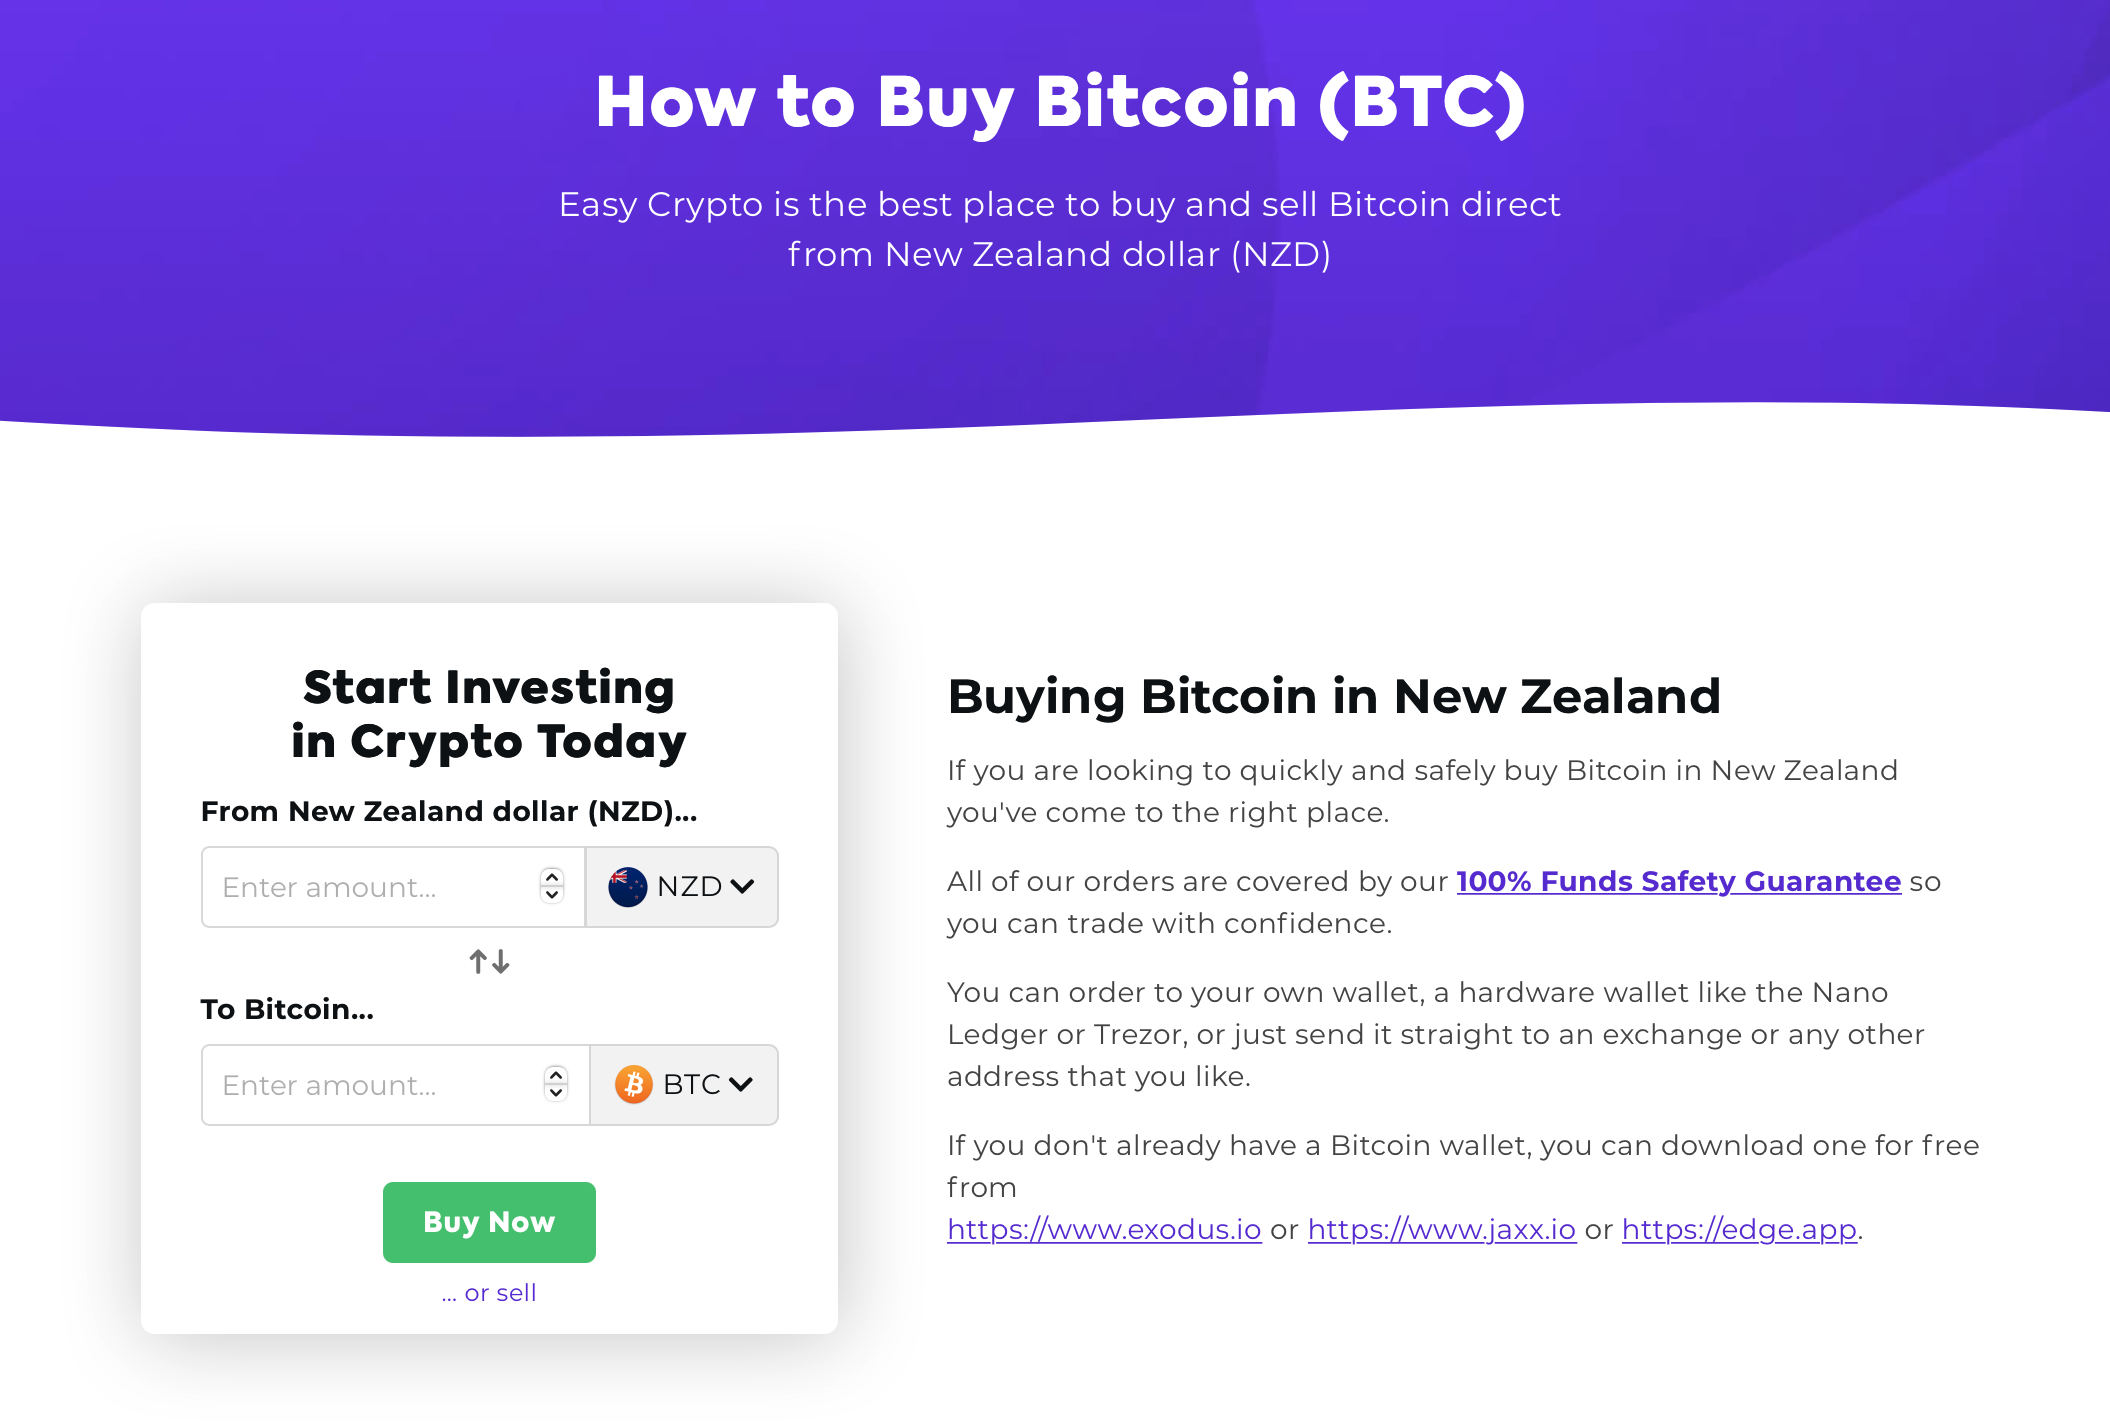 Screenshot of how to buy bitcoin in New Zealand page from Easy Crypto.